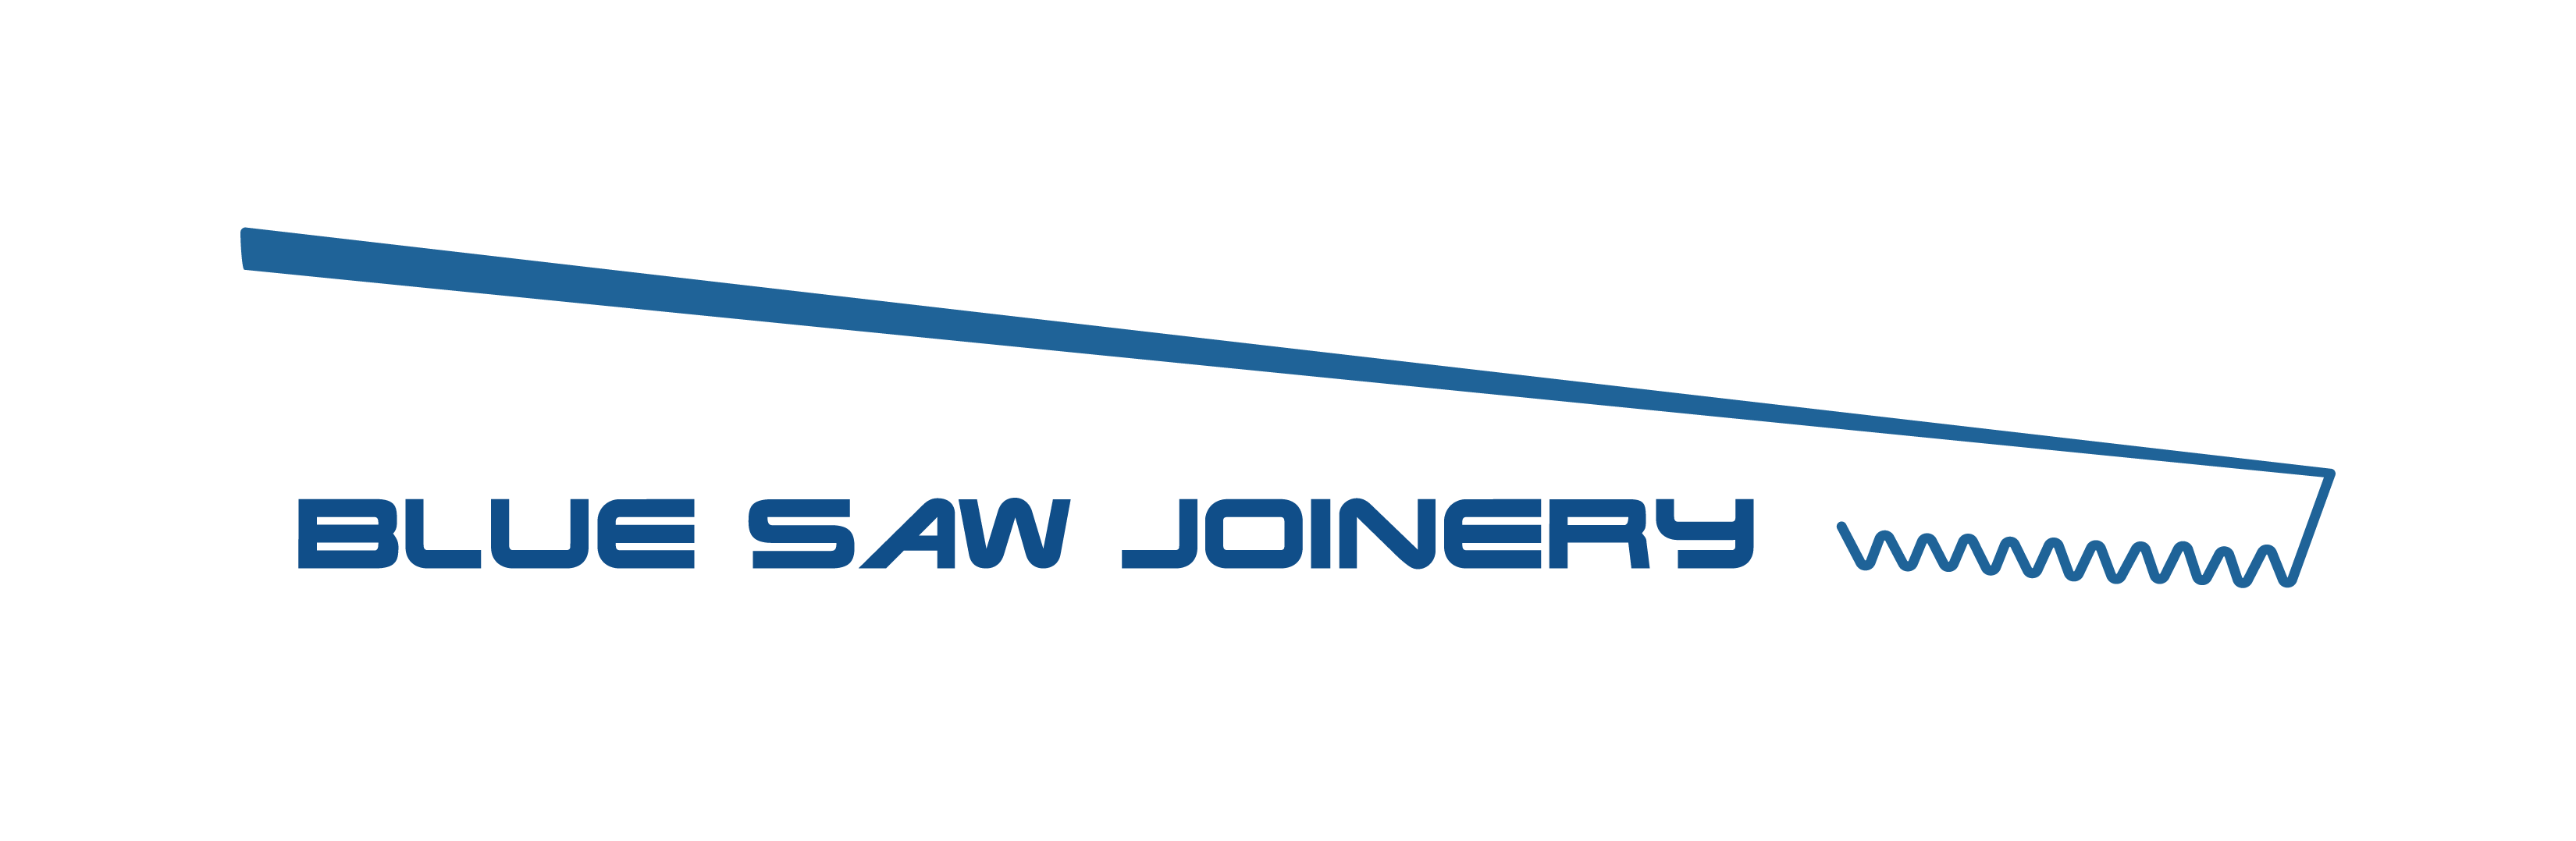 Blue Saw Joinery Logo